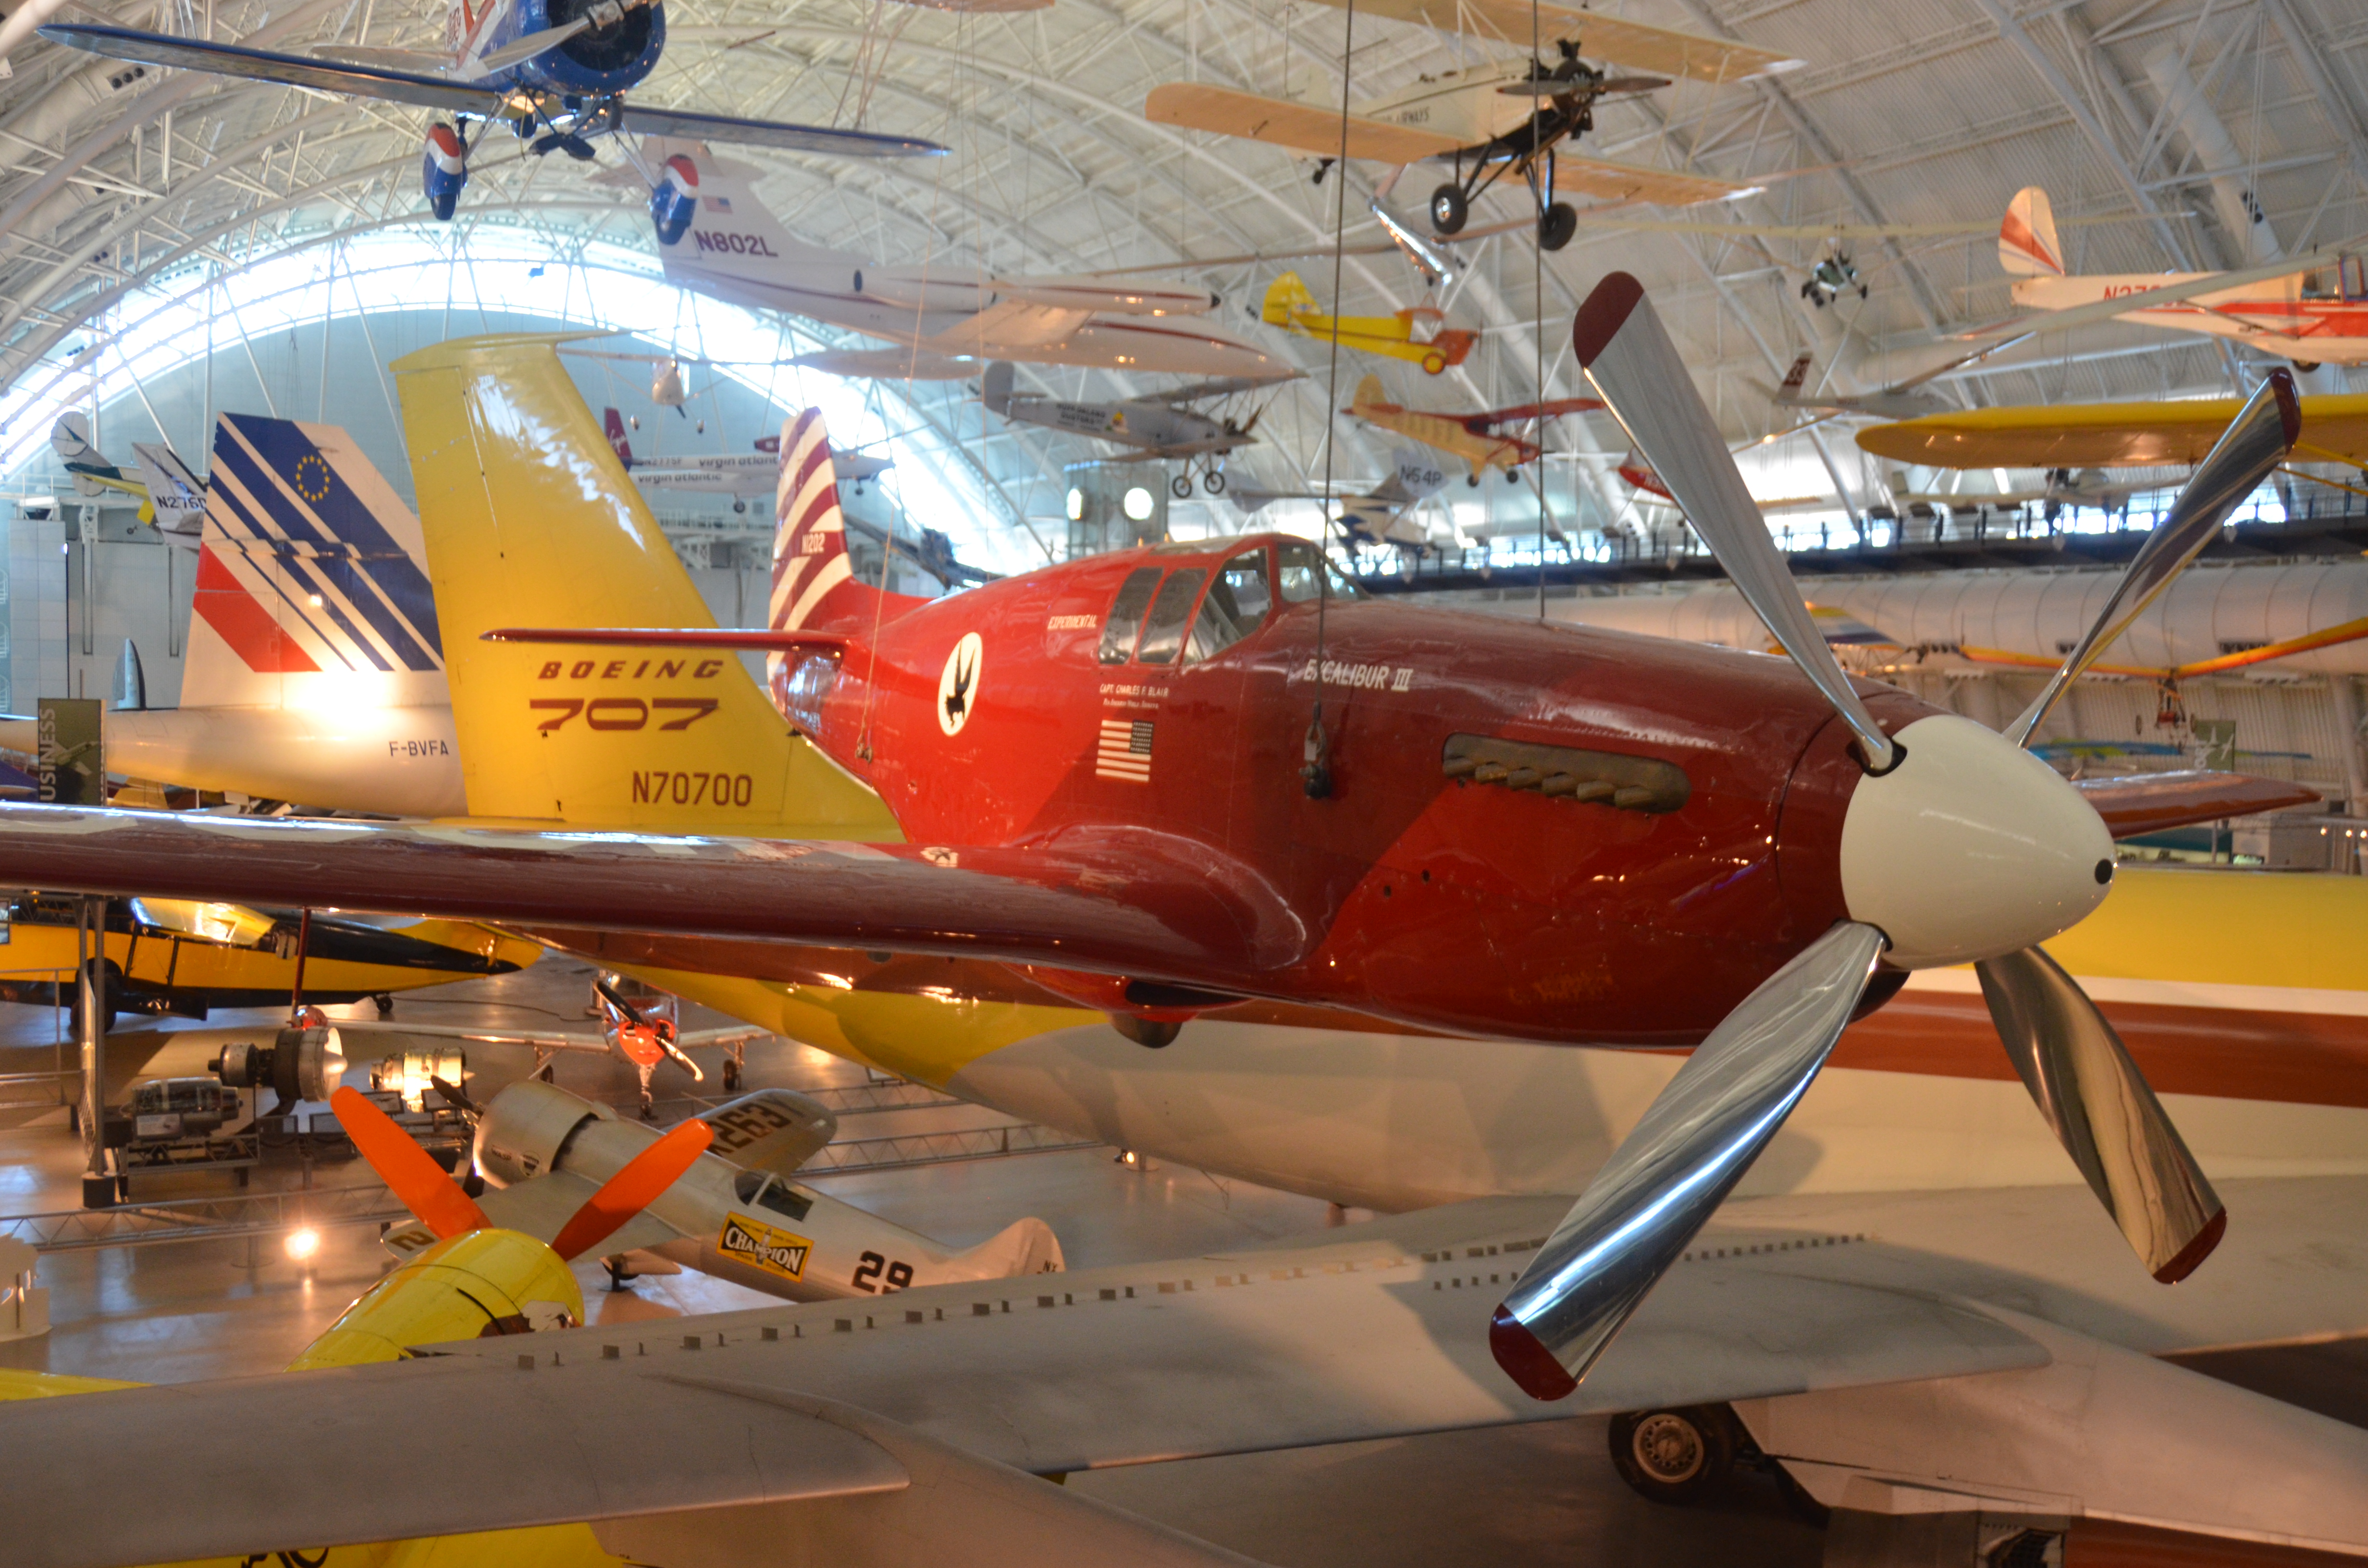 Steven F. Udvar-Hazy Center: North American P-51C, &quot;Excalibur III&quot;, with tails of Concorde &amp; Boeing 707 in background